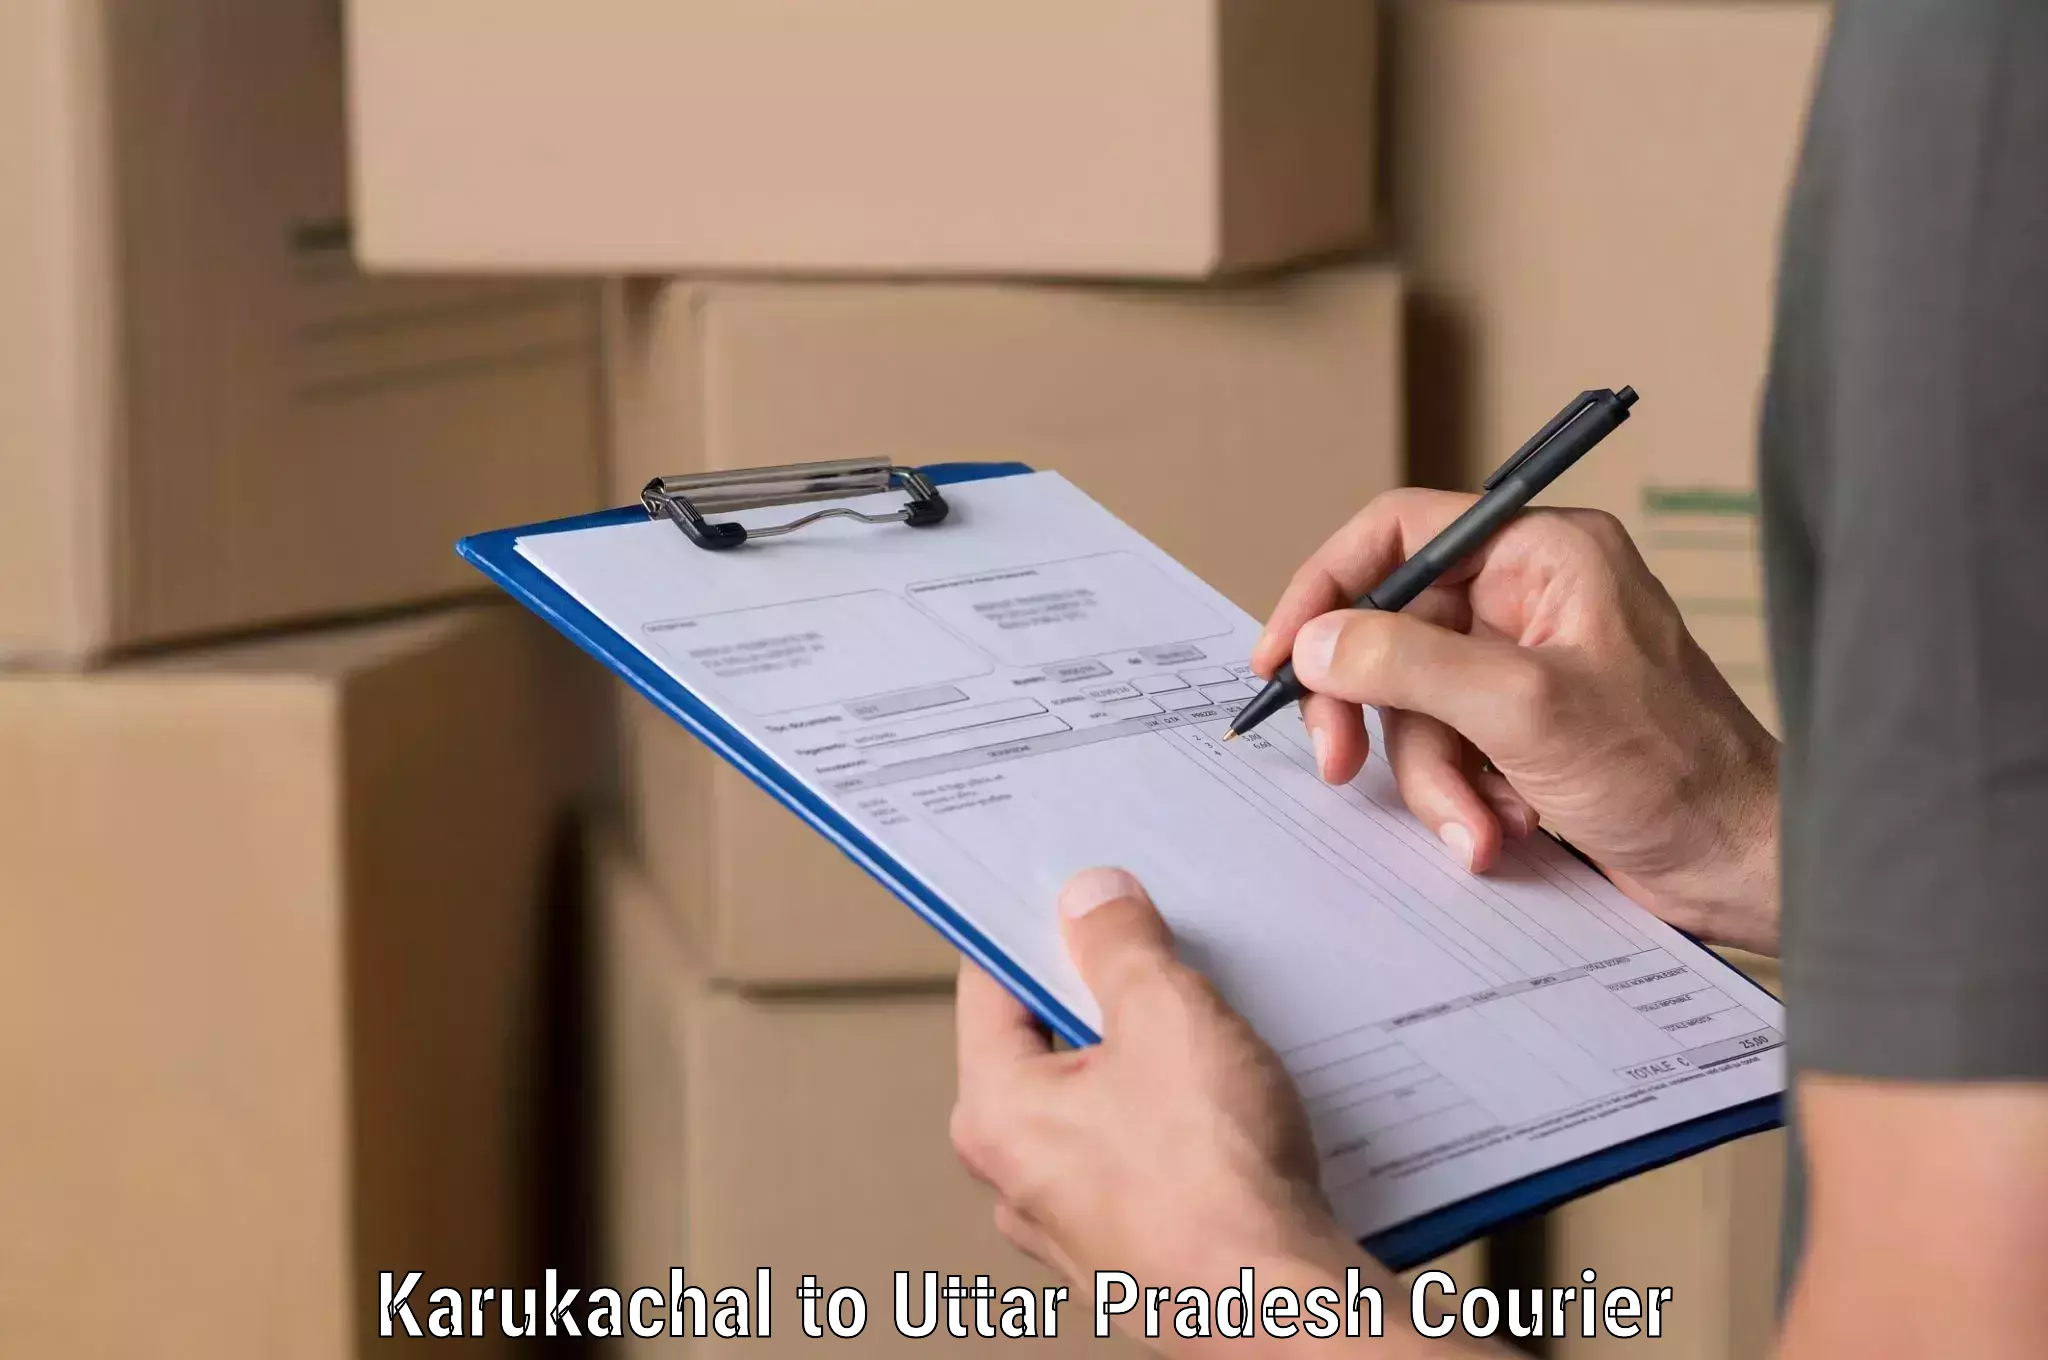 Flexible delivery scheduling Karukachal to Bansi